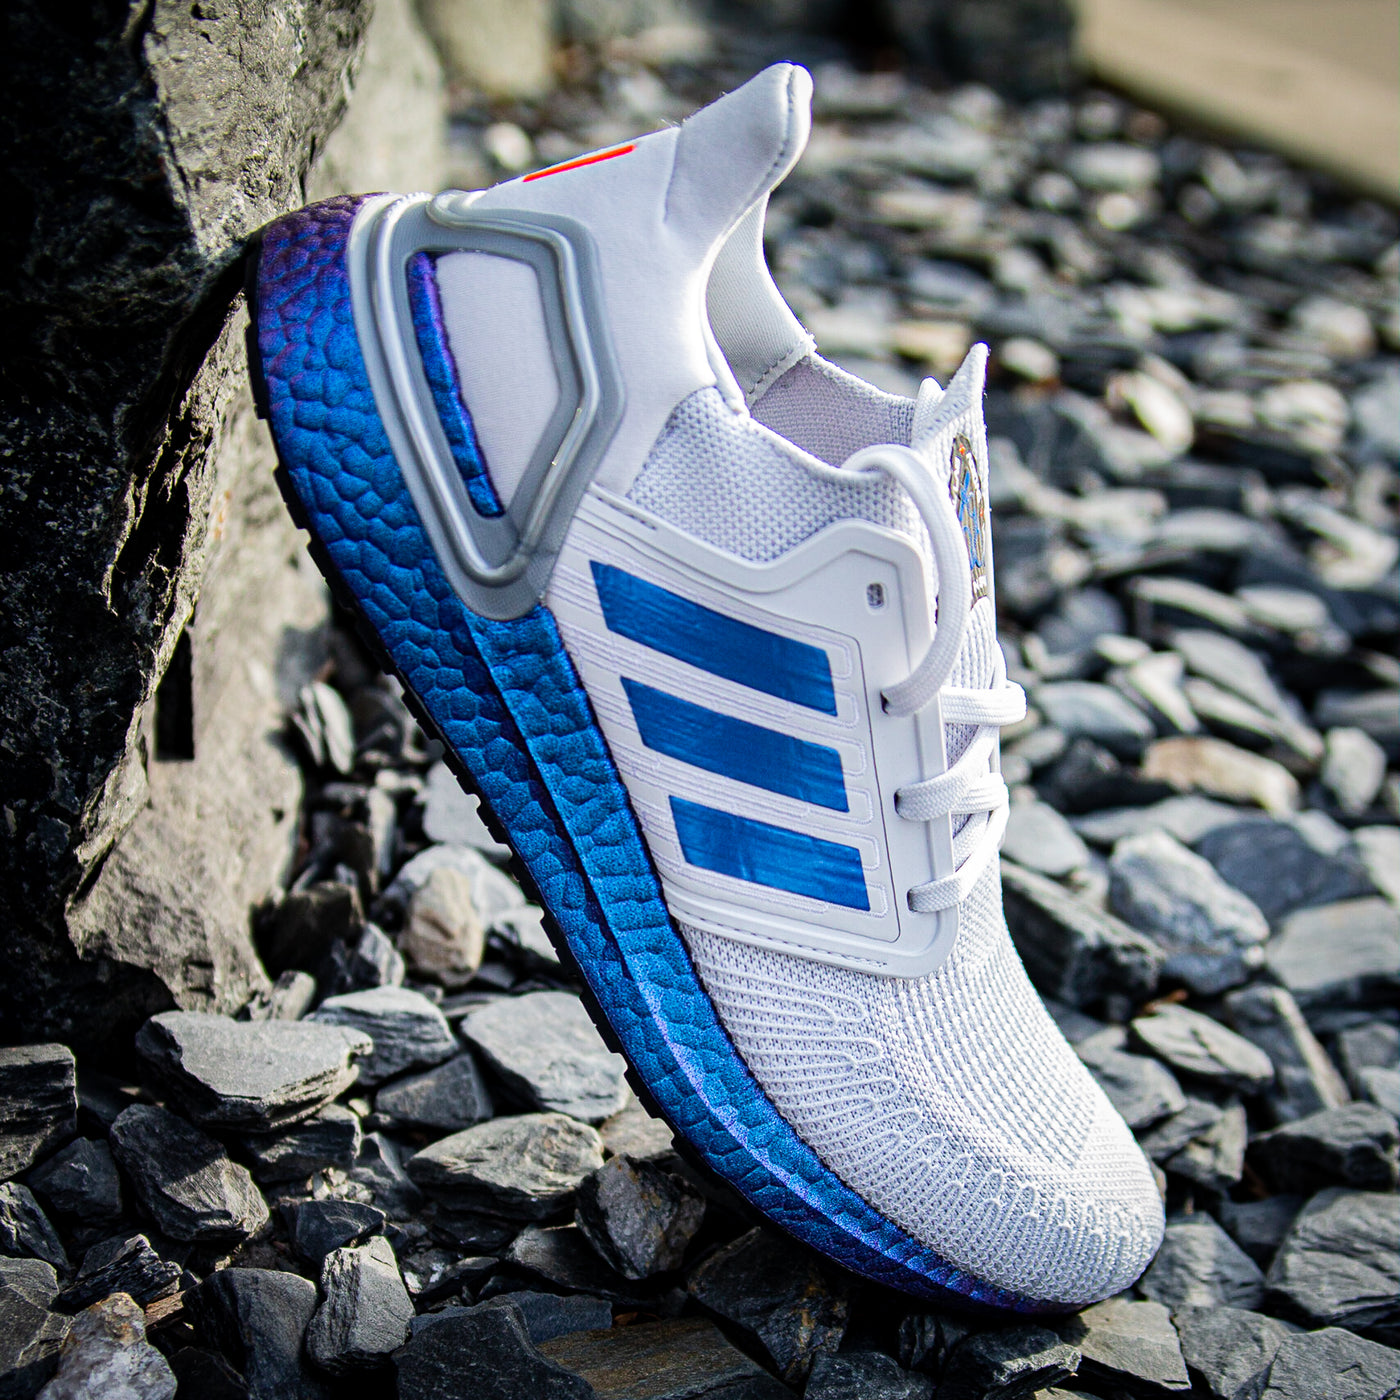 Ice Blue Color Shift Stripes for Ultra Boost 20